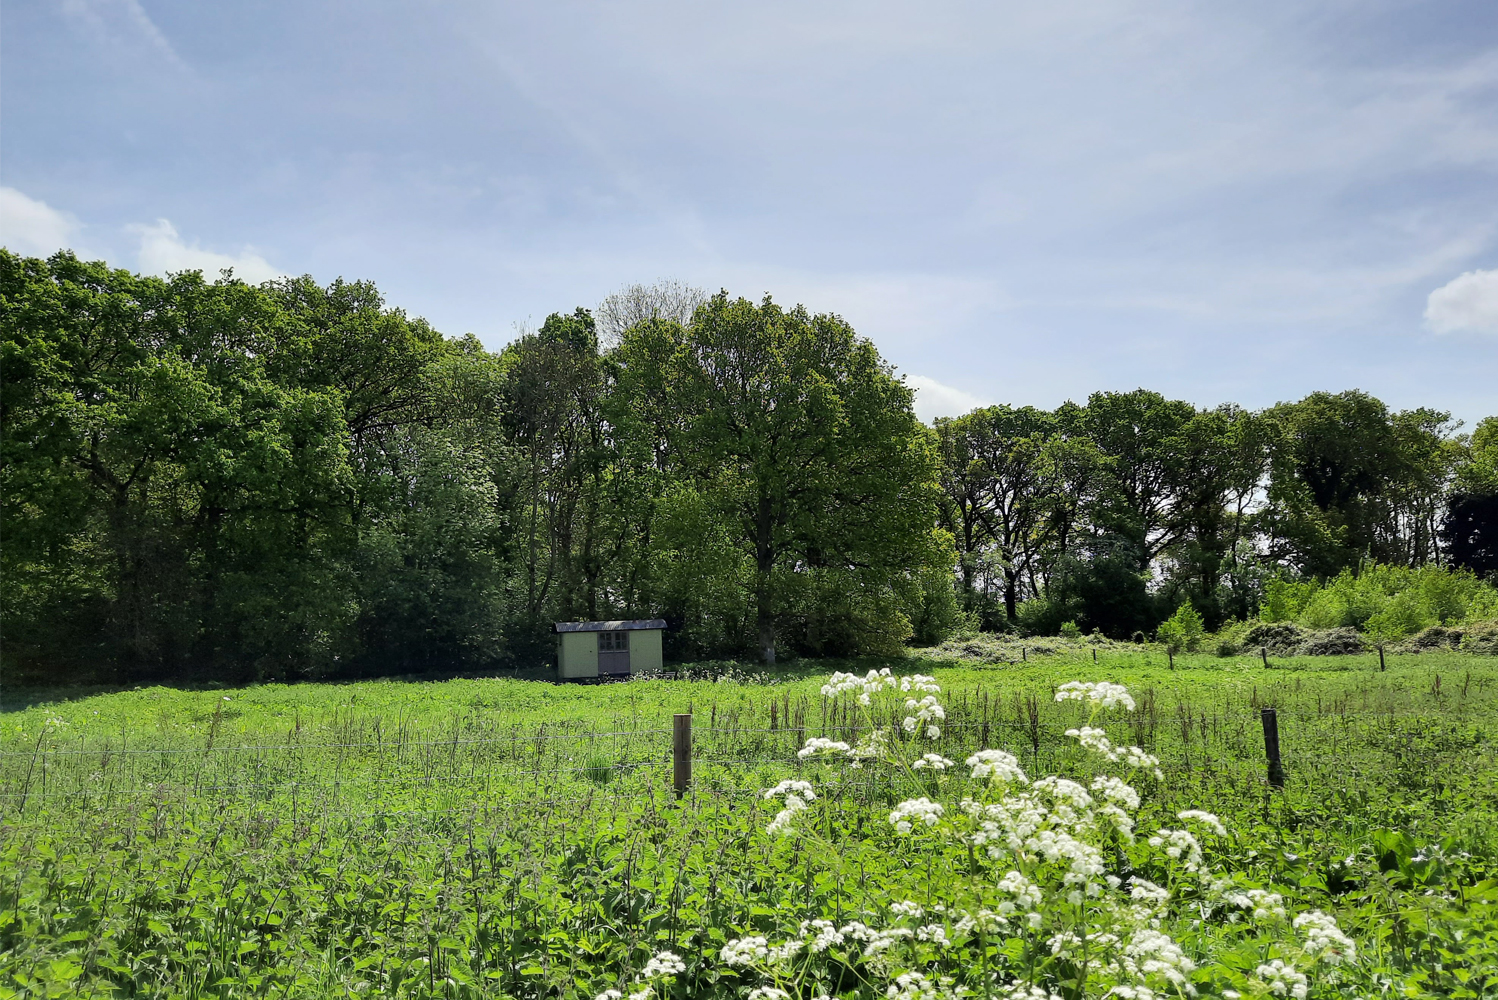 View of Boundary shepherd's hut across the verdant meadow with flowering white cow parsley in the foreground on a sunny May day with blue sky and hazy high cloud. Enjoy shepherds hut glamping in Hampshire here at Wallops Wood